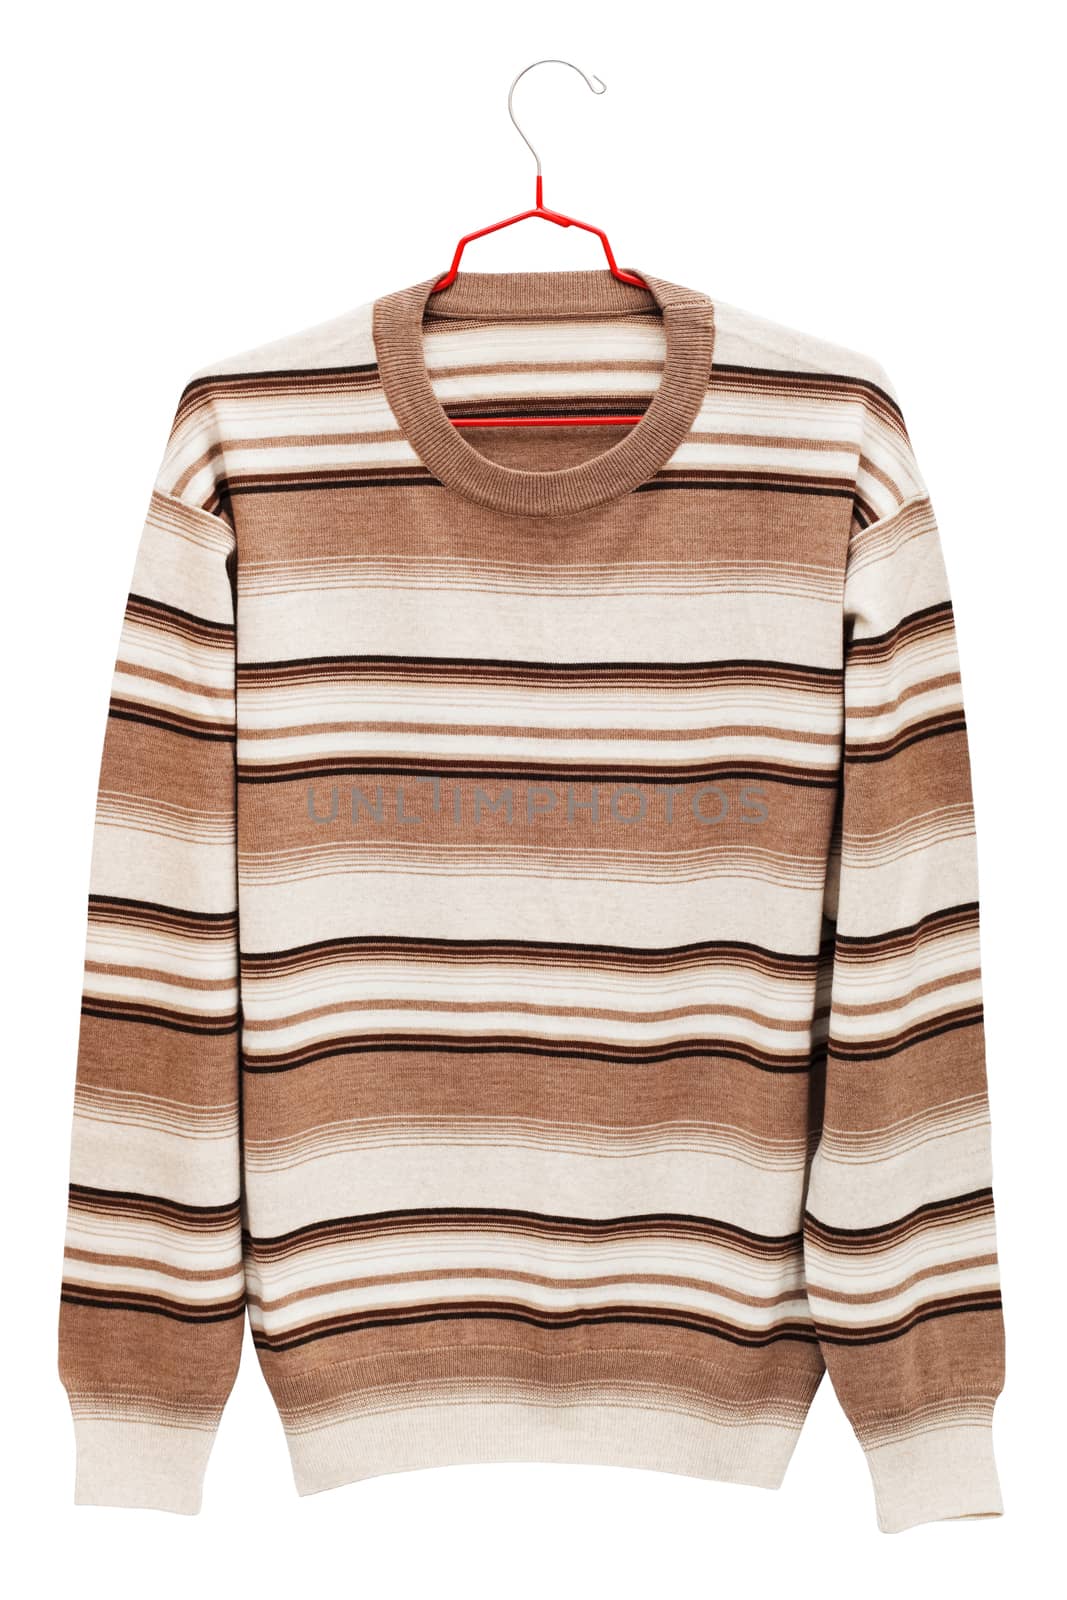 warm striped sweater on a white background